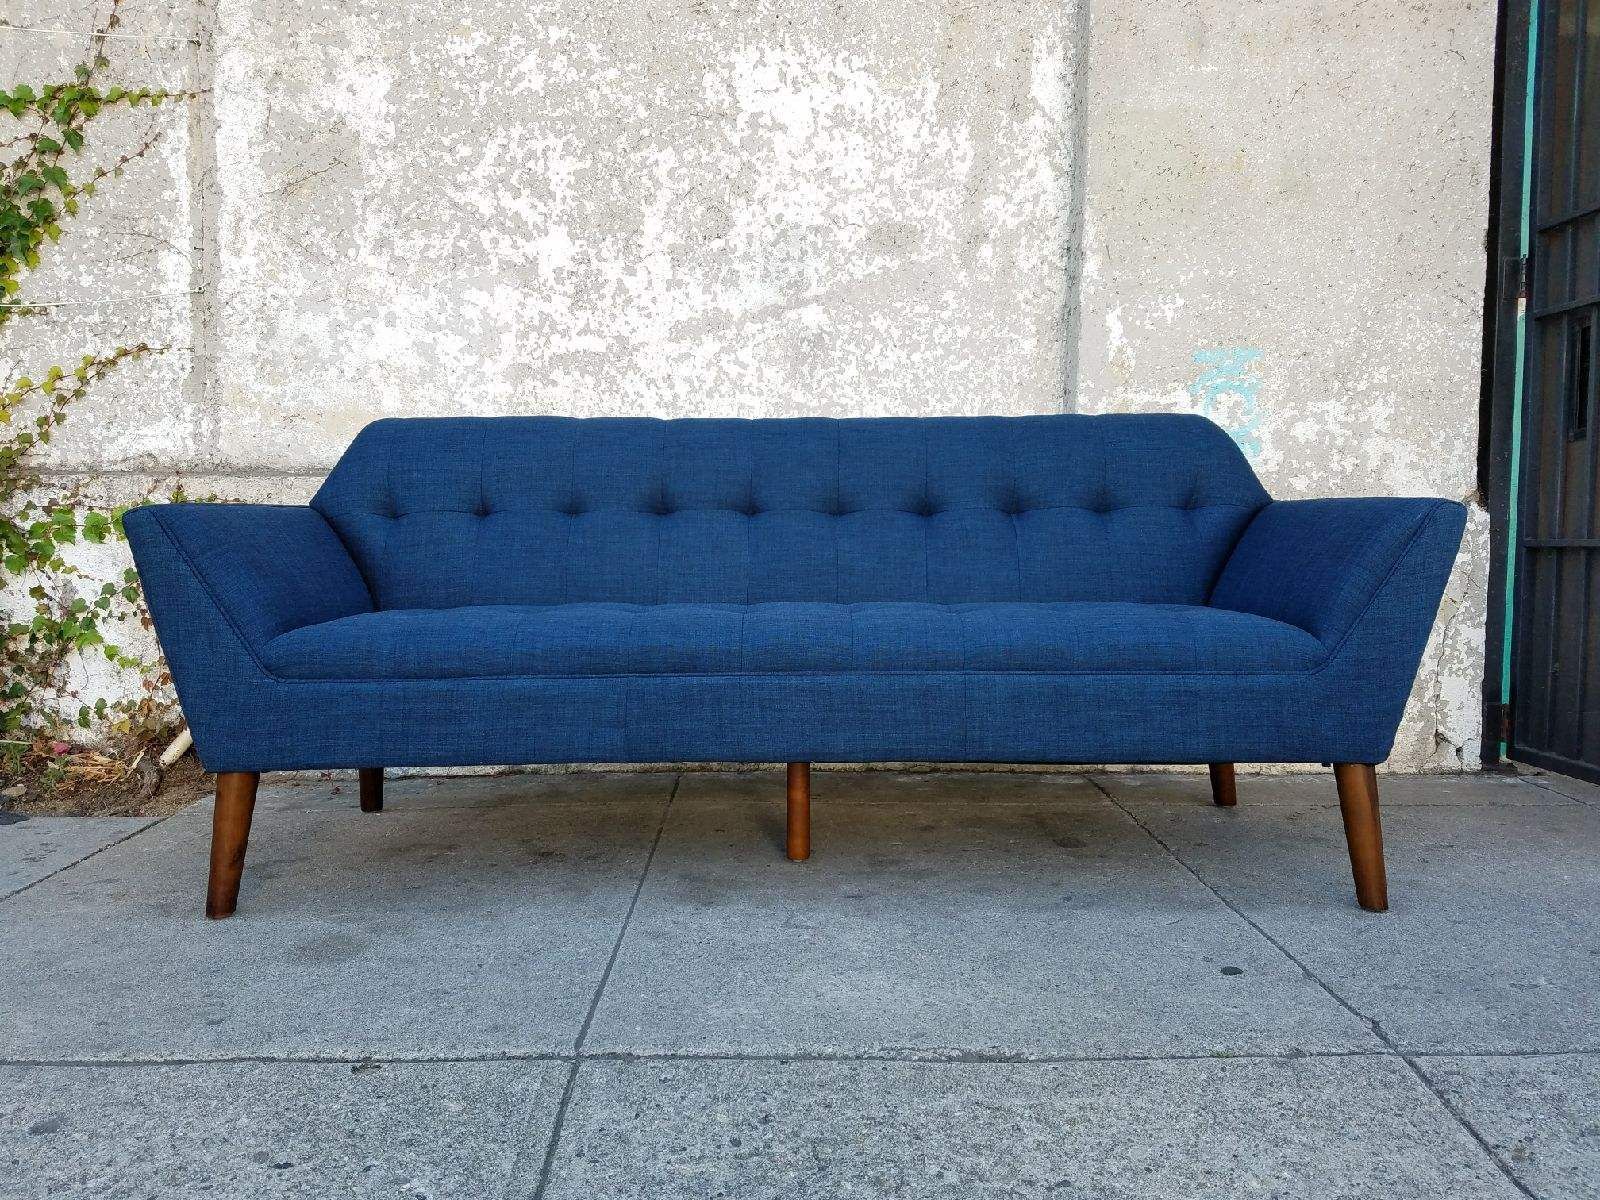 Downtown Navy Blue Sofa | Furniture, Navy Blue Sofa, Blue Sofa Throughout Dove Mid Century Sectional Sofas Dark Blue (View 3 of 15)